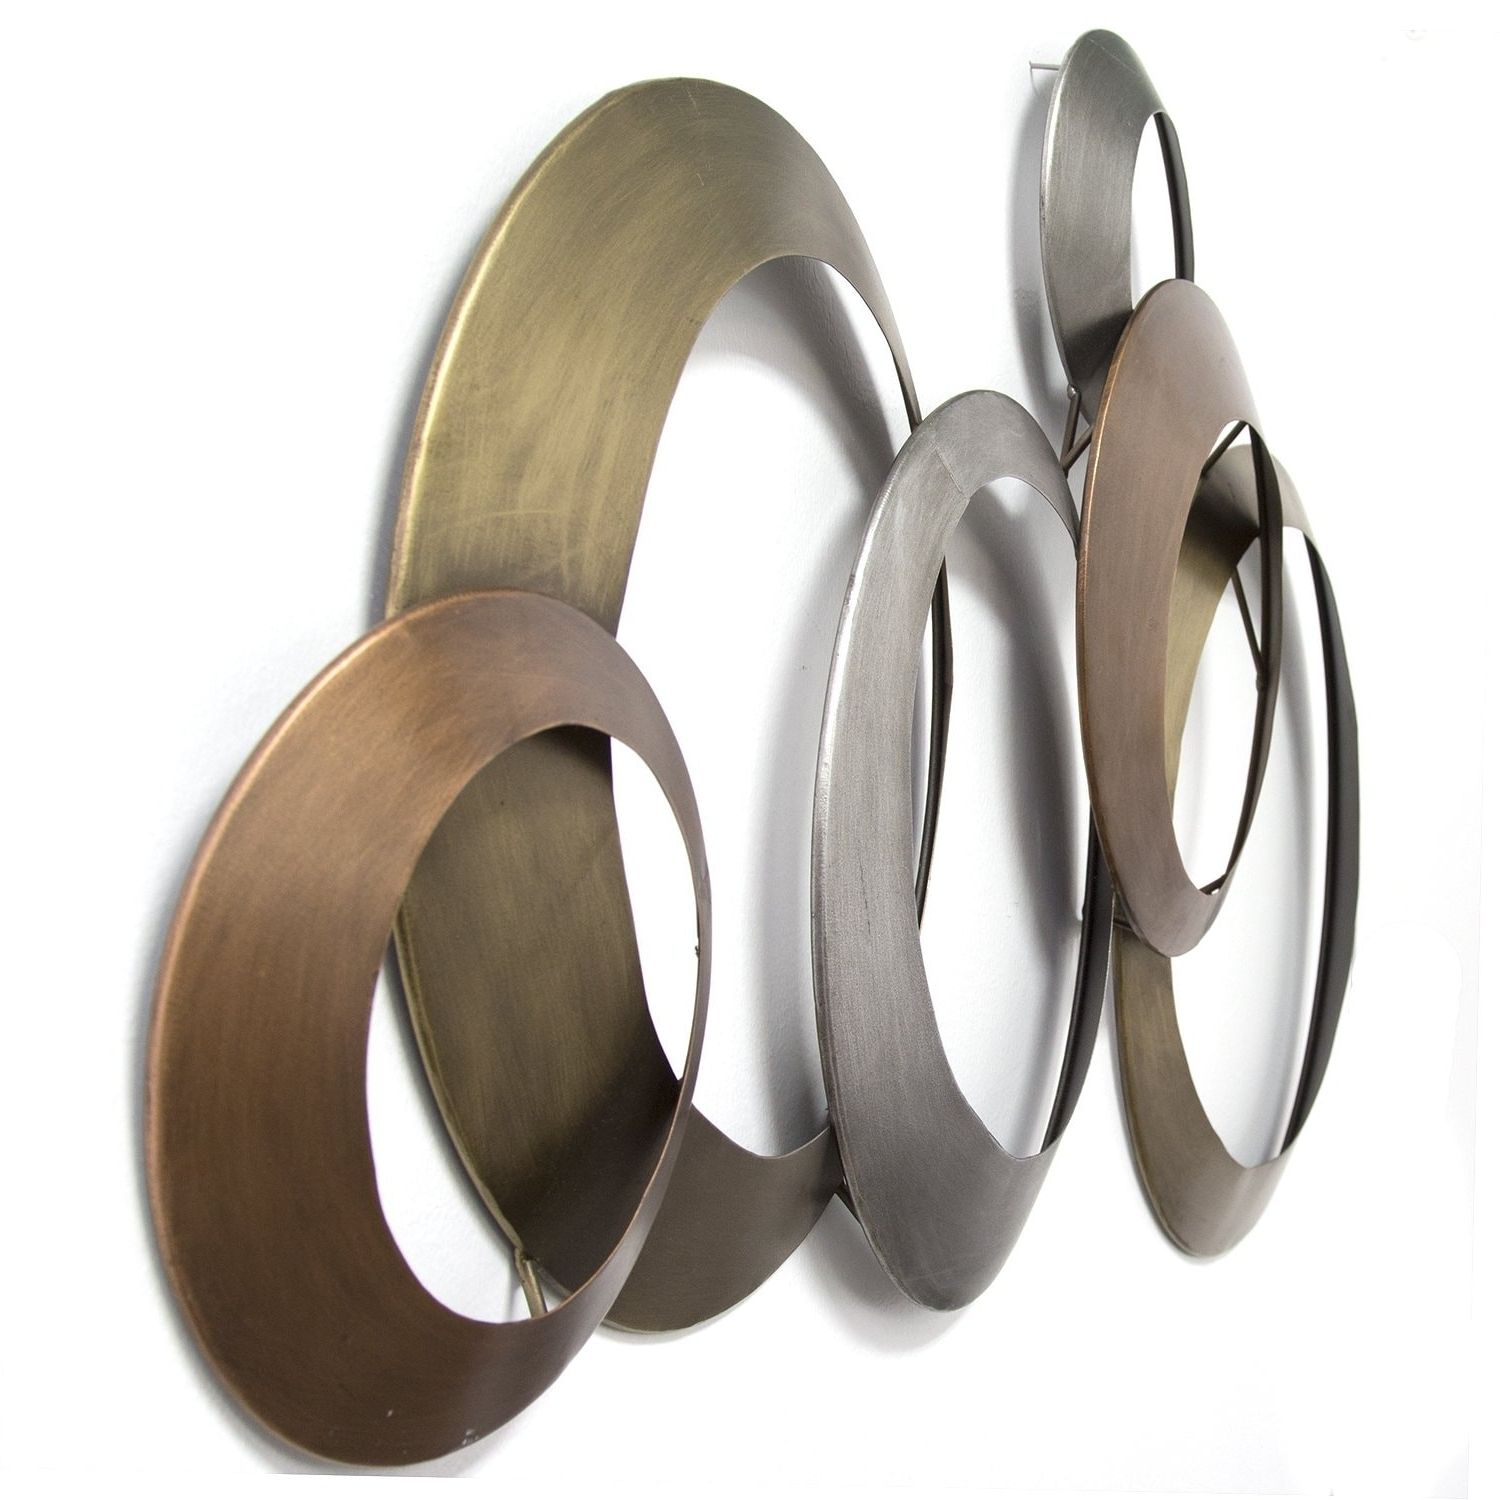 Preferred Rings Wall Décor By Stratton Home Decor With Stratton Home Decor Multi Metallic Rings Wall Decor (View 9 of 20)